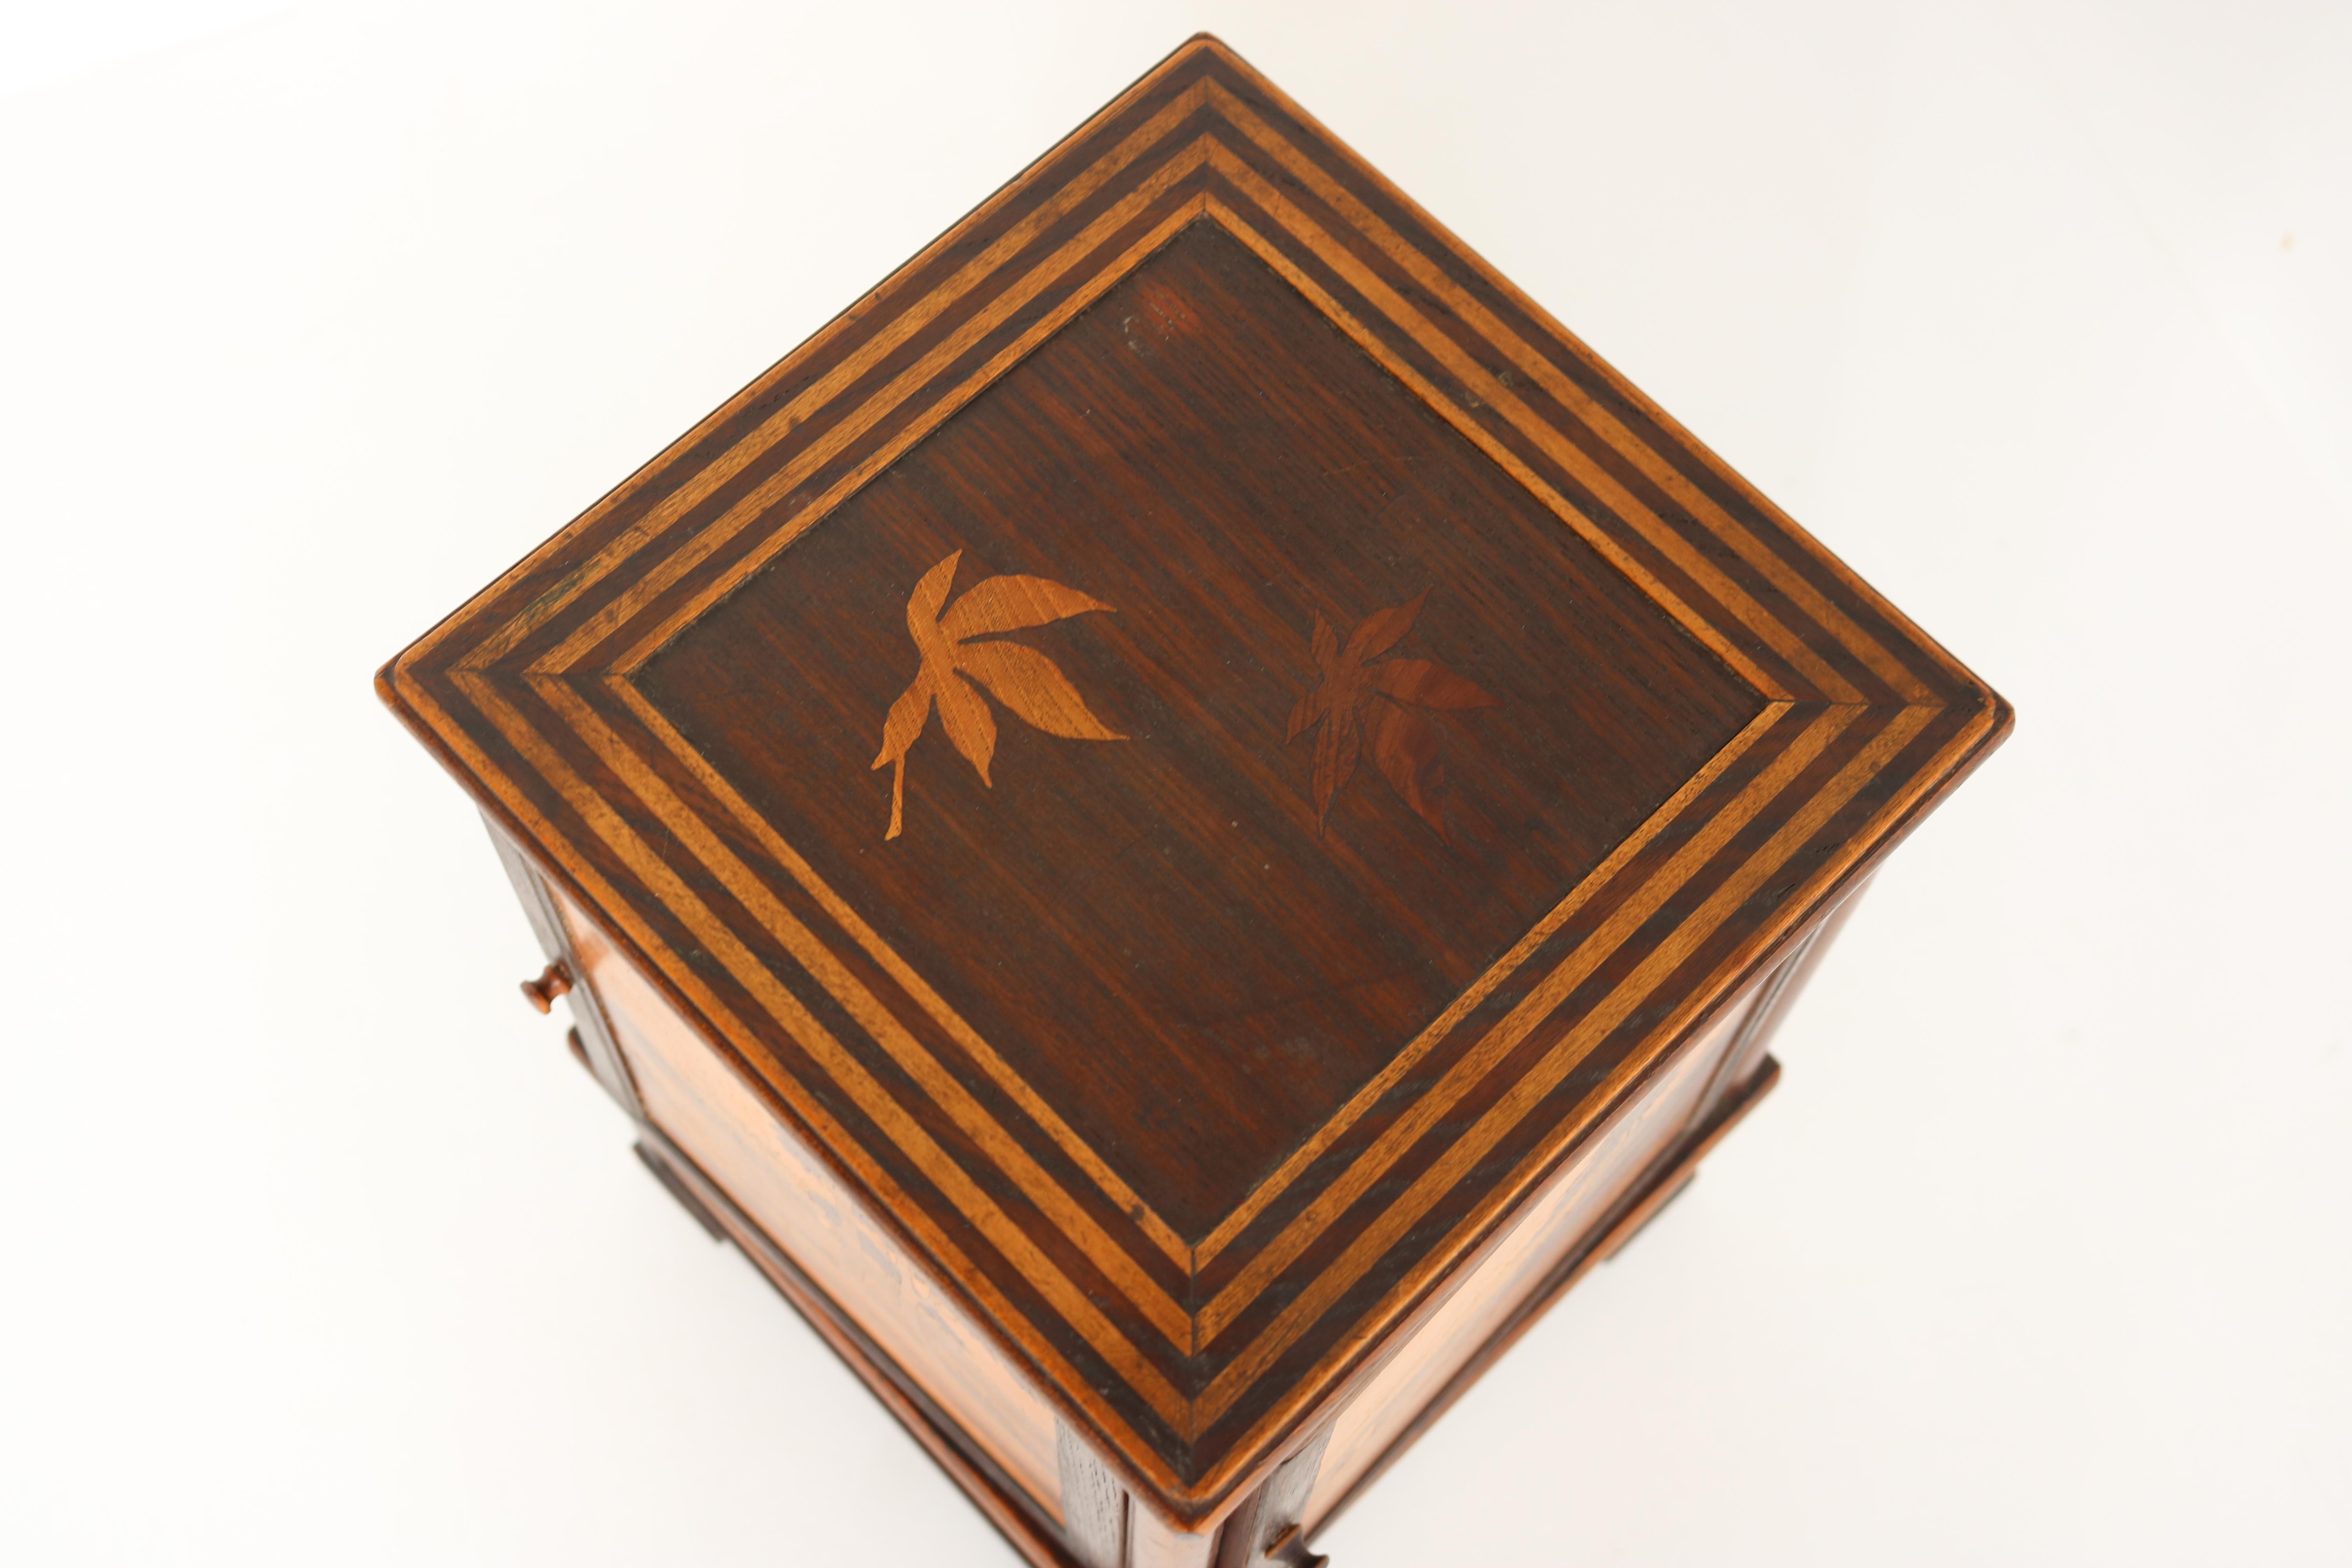 Antique French Inlaid Marquetry Cigar Box 1900 Cigarette Cabinet Desk Decoration For Sale 3